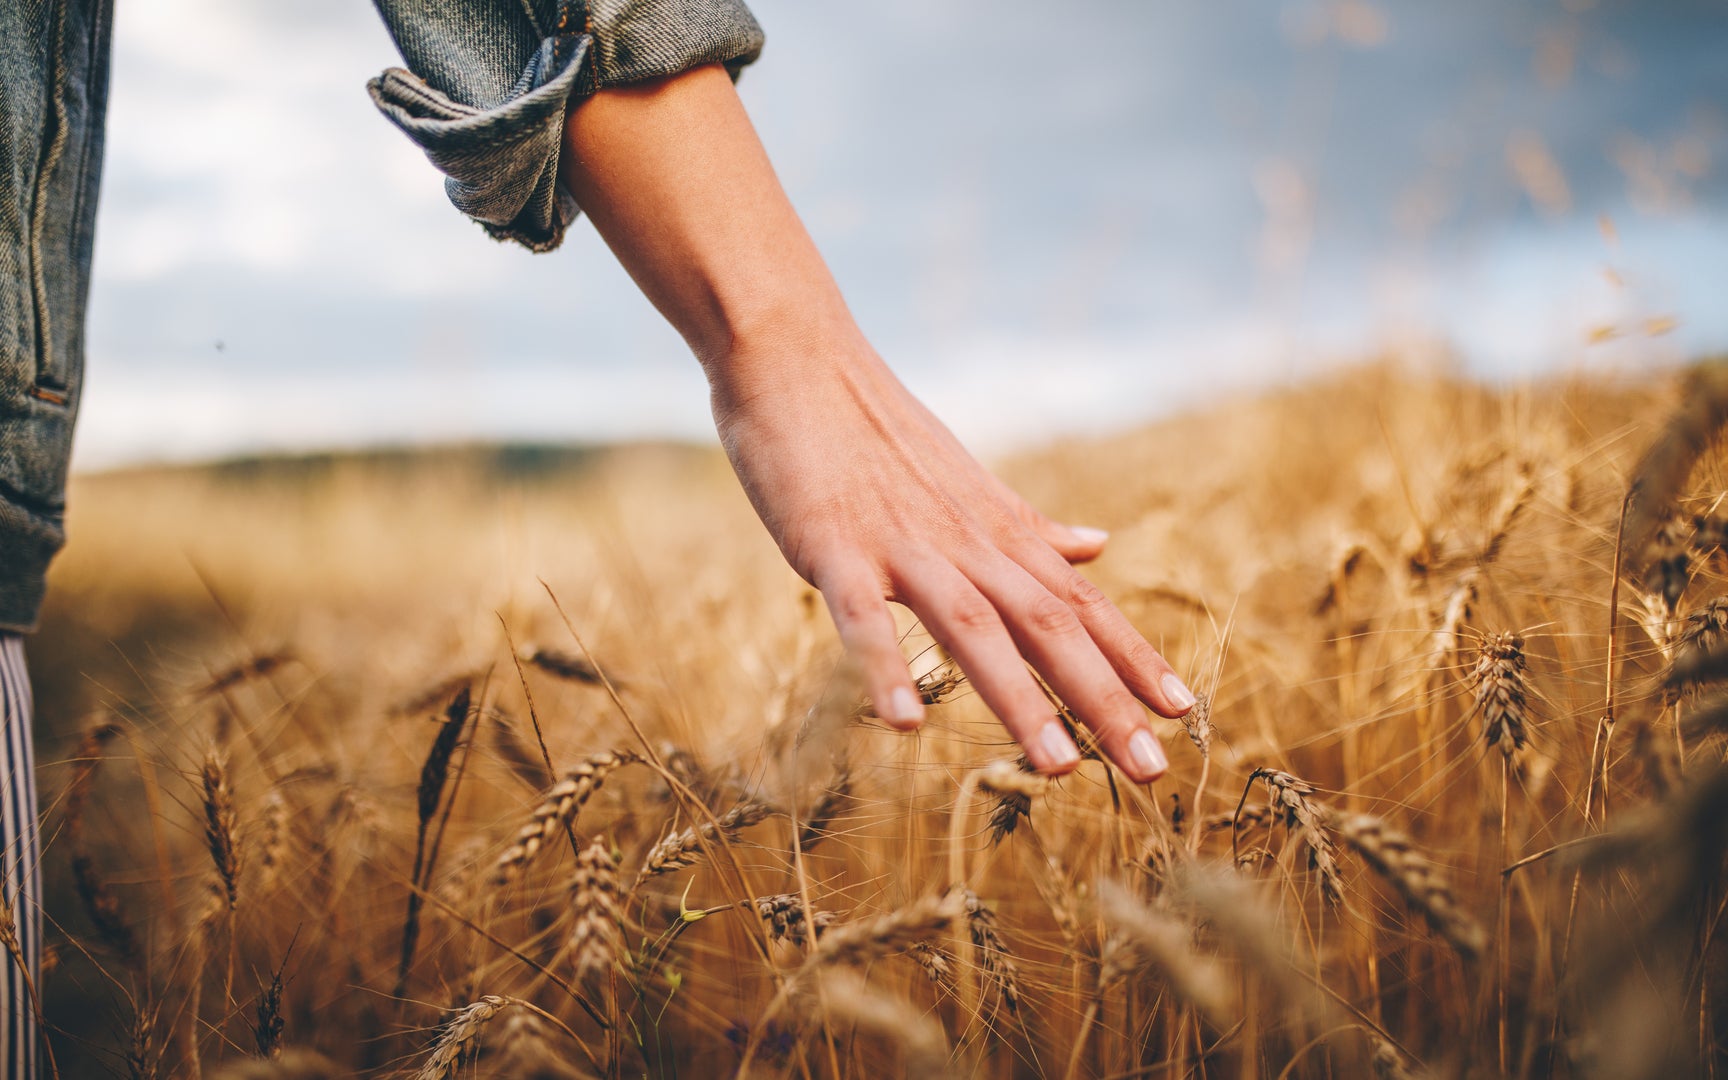 Close-up of a hand skimming over stalks of wheat in a wheat field.